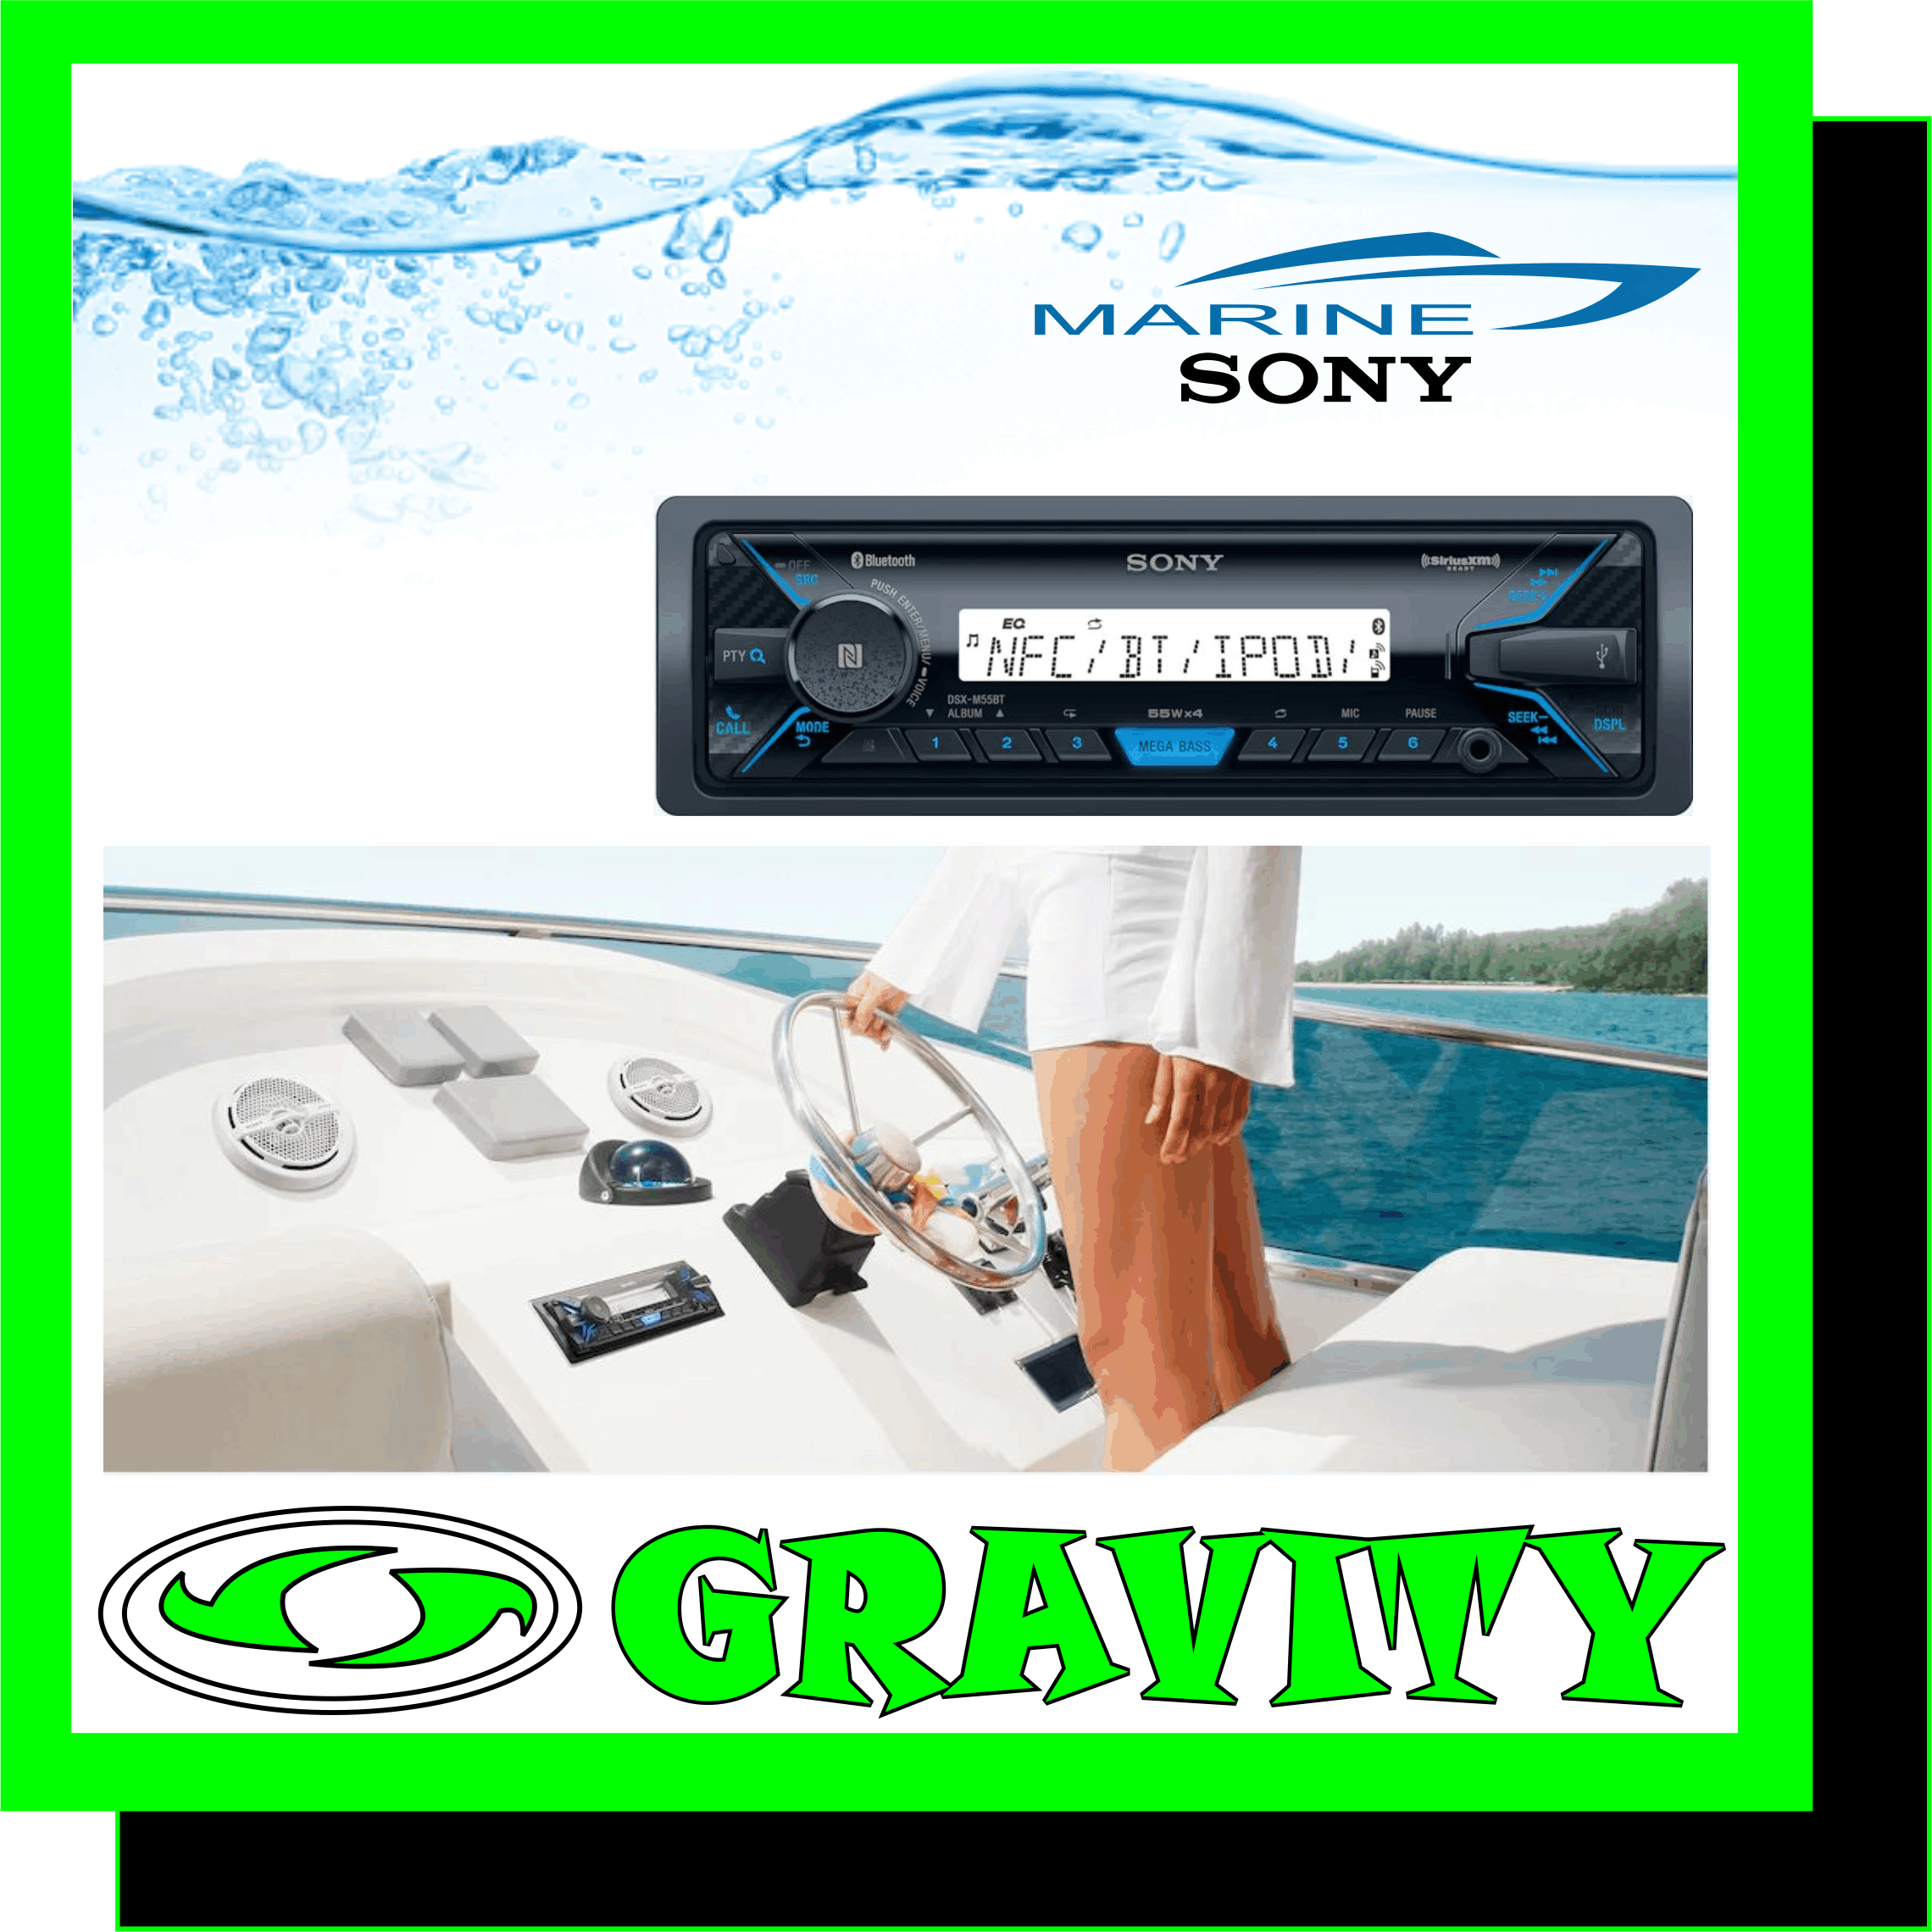 DSX-M55BT  Marine Media Receiver with Bluetooth ? 55W x 4 max. power ? MEGA BASS ? 3 pre out ? 5-band equaliser ? Low-pass filter ? Bluetooth and NFC connectivity ? MP3, WAV, FLAC playback  SPECIFICATIONS Take to the water with the ultra-versatile DSX-M55BT media receiver. Enjoy rich, dynamic sound with Mega Bass, and listen from all of your favorite gadgets with USB, Bluetooth� and One-touch NFC connectivity. Siri� Eyes Free and a hands-free built-in mic make communication simple.  Easy Bluetooth� connectivity with NFC One-touch/Bluetooth� wireless audio streaming  Mega Bass produces rich, punchy sound  FM/AM radio tuner and MP3 playback via USB  Take calls hands-free with a built-in mic